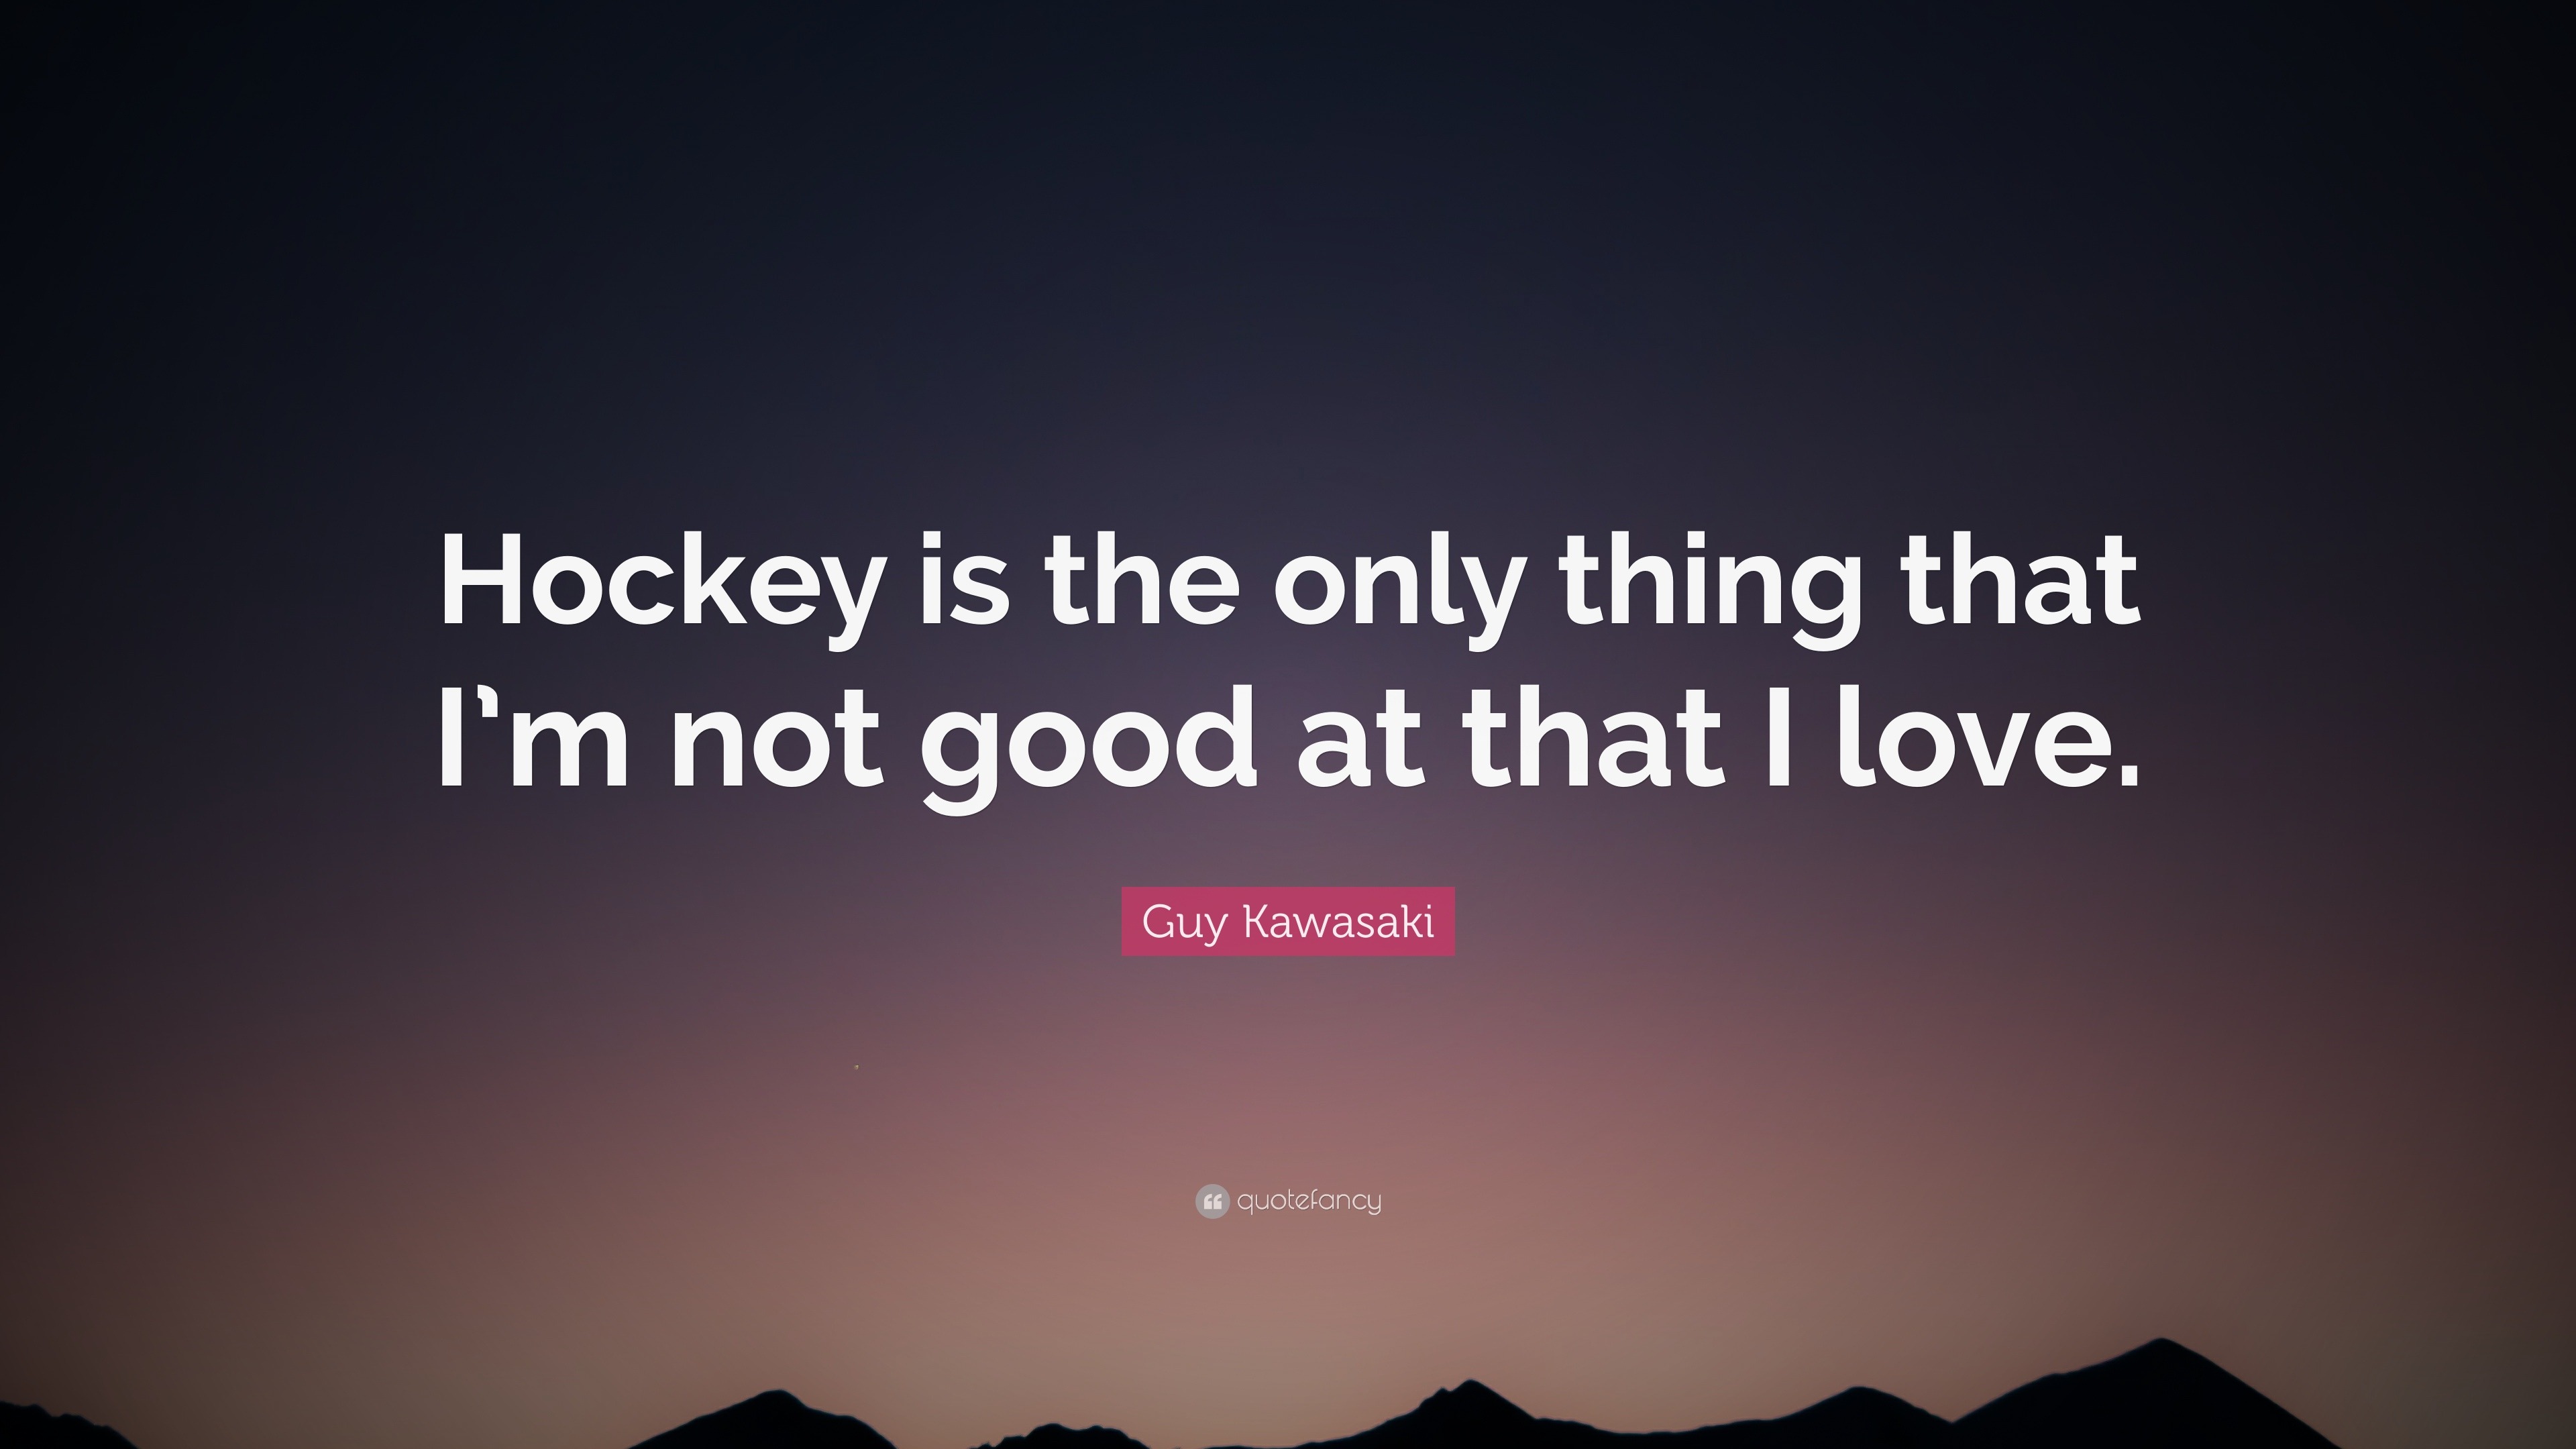 Guy Kawasaki Quote “Hockey is the only thing that I m not good